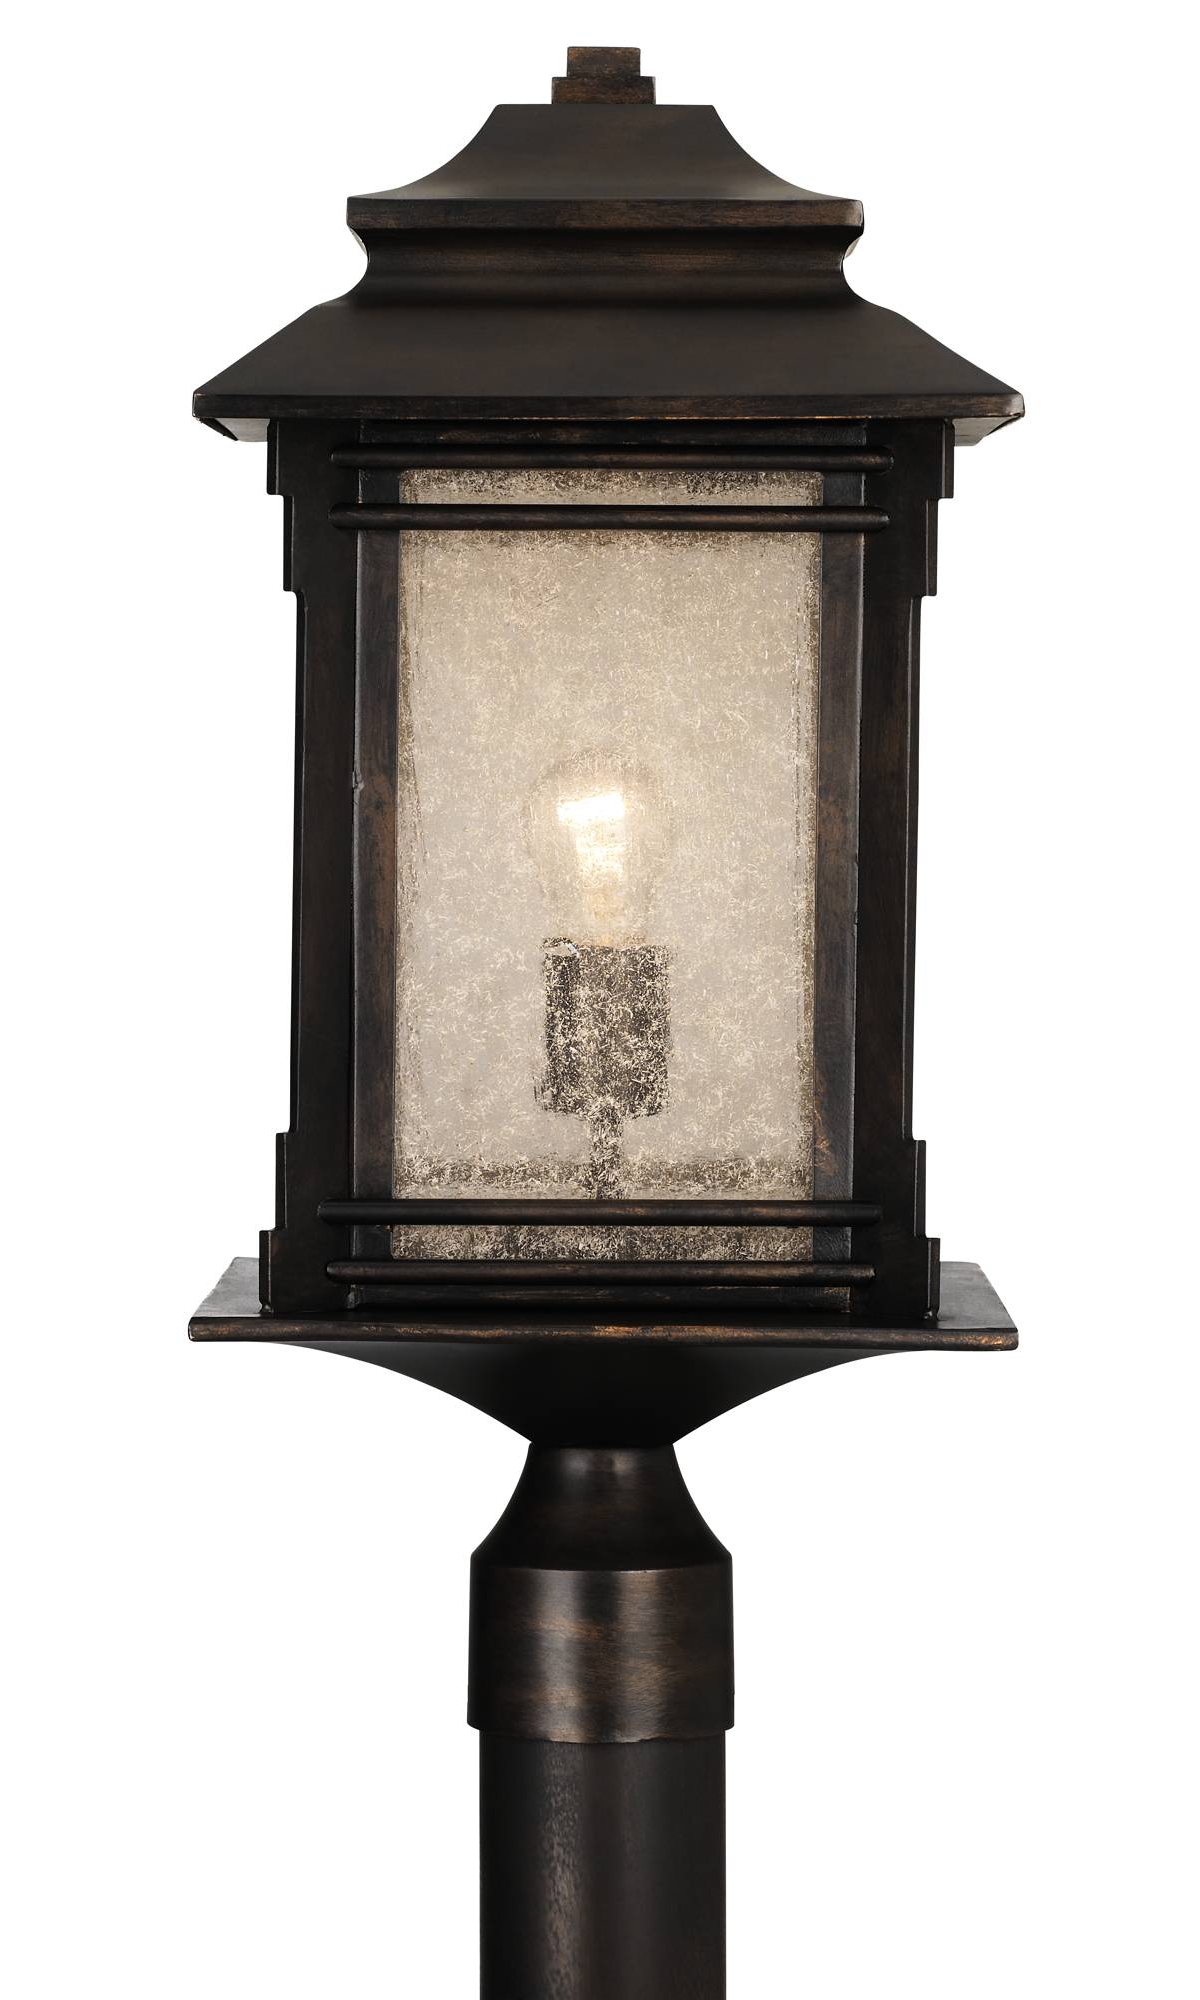 Hickory Point Rustic Outdoor Post Light Fixture Walnut Bronze Steel 21 1/2" Frosted Cream Glass Lantern for Exterior House Porch Patio Outside Garden